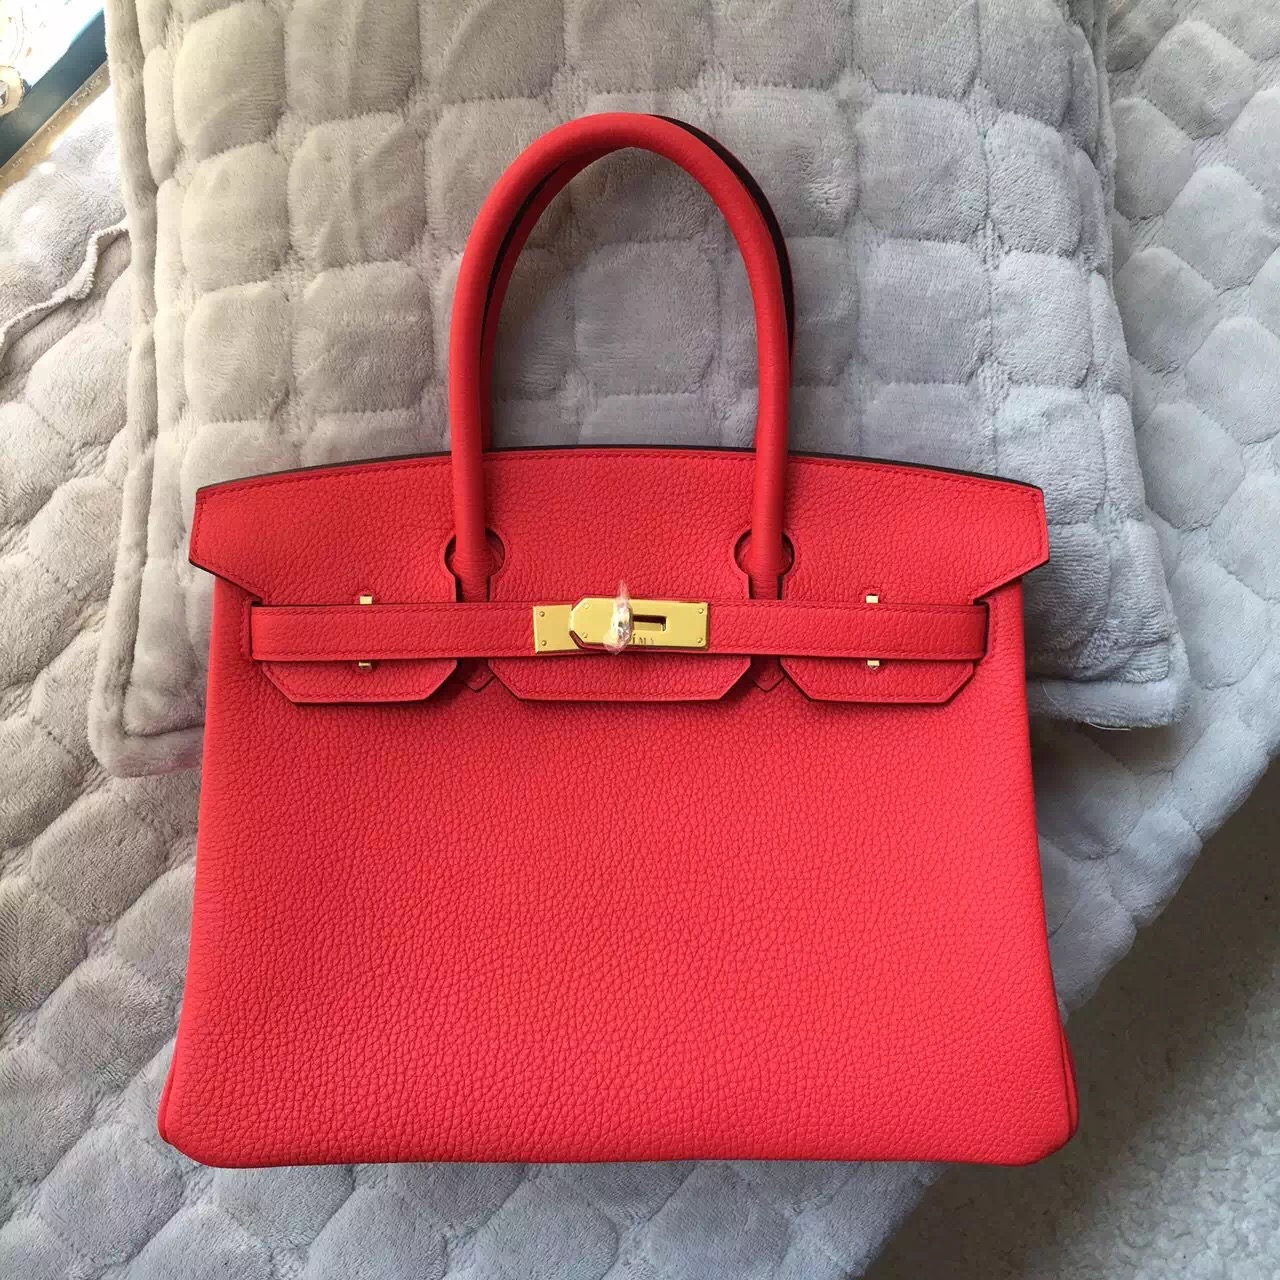 Hermes Birkin 30 in 2R Peony Red Togo Calfskin Leather Tote Bag Gold ...